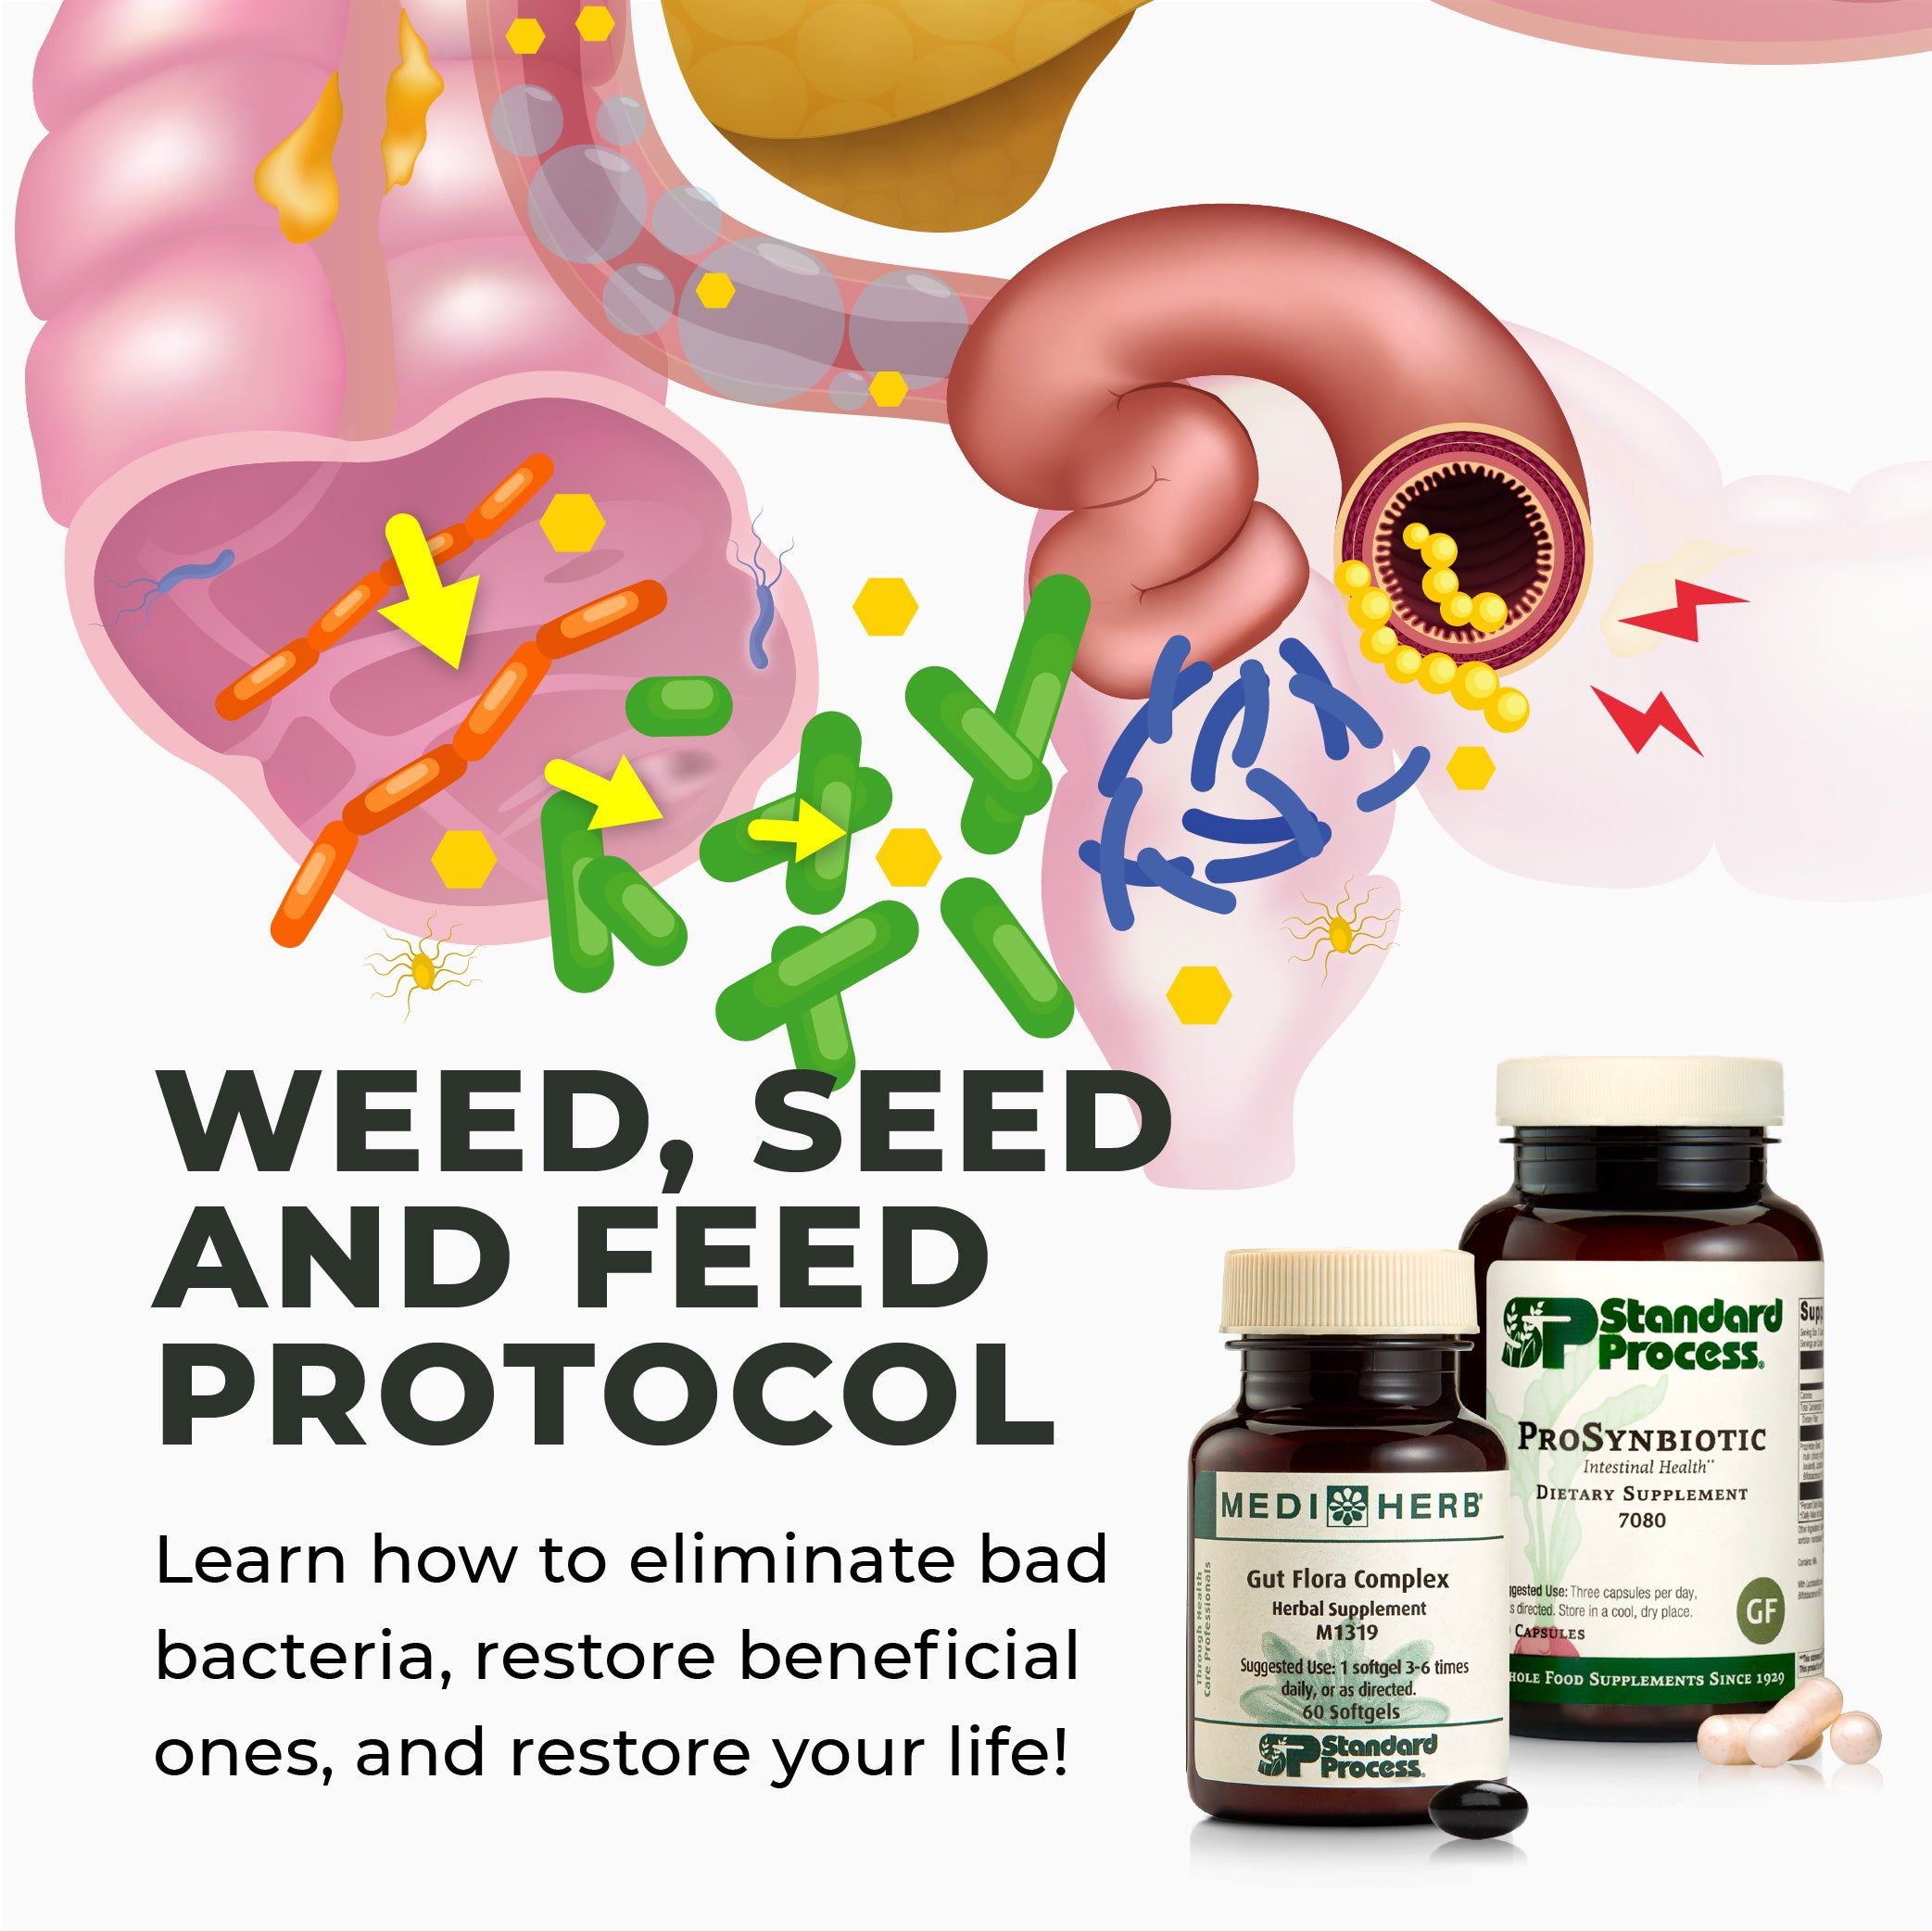 Weed, Feed and Seed Protocol